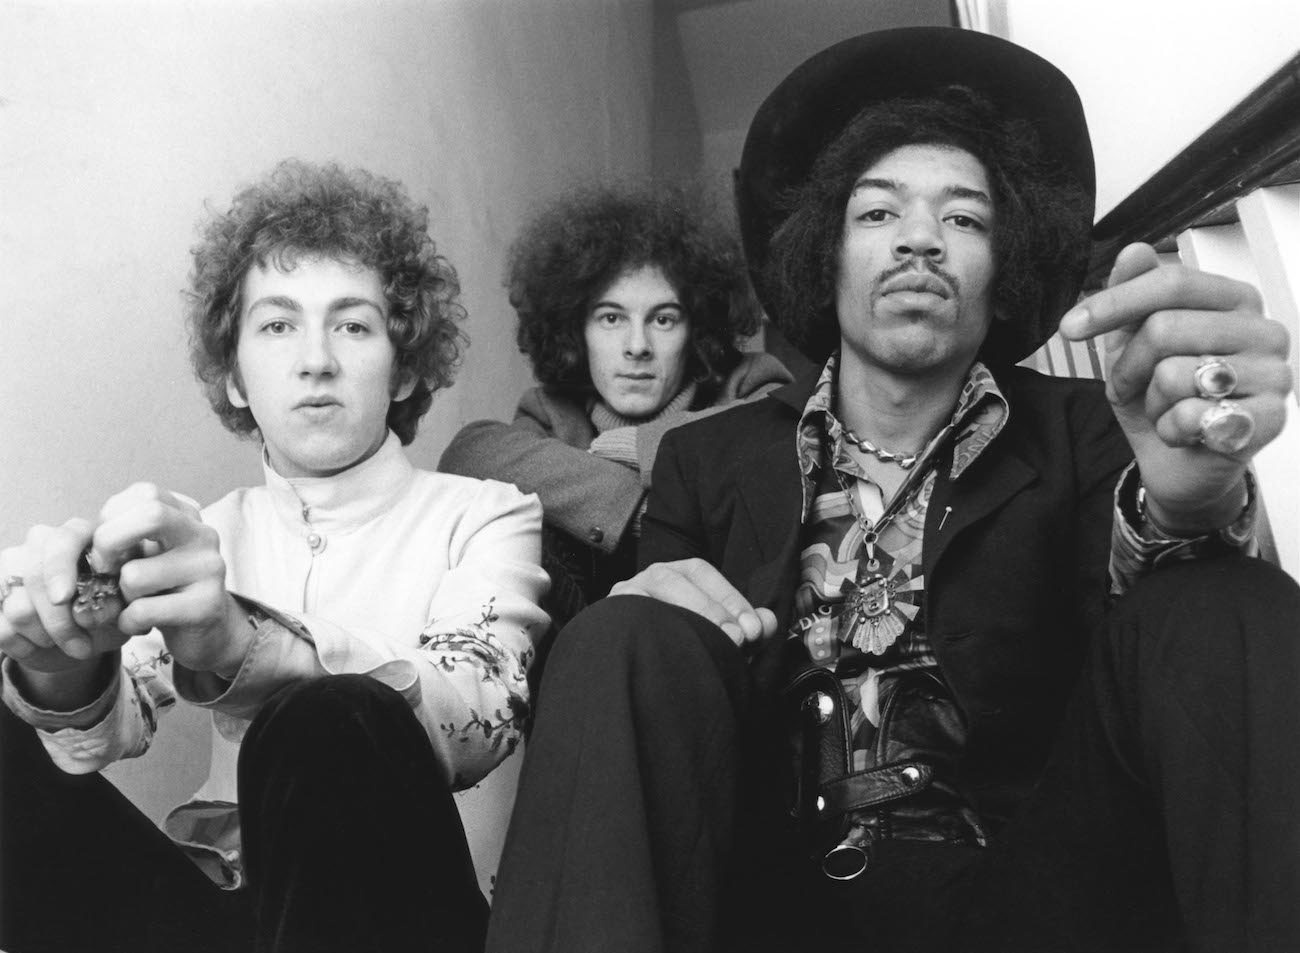 The Jimi Hendrix Experience posing on the stairs wearing 1960s clothes in 1968.